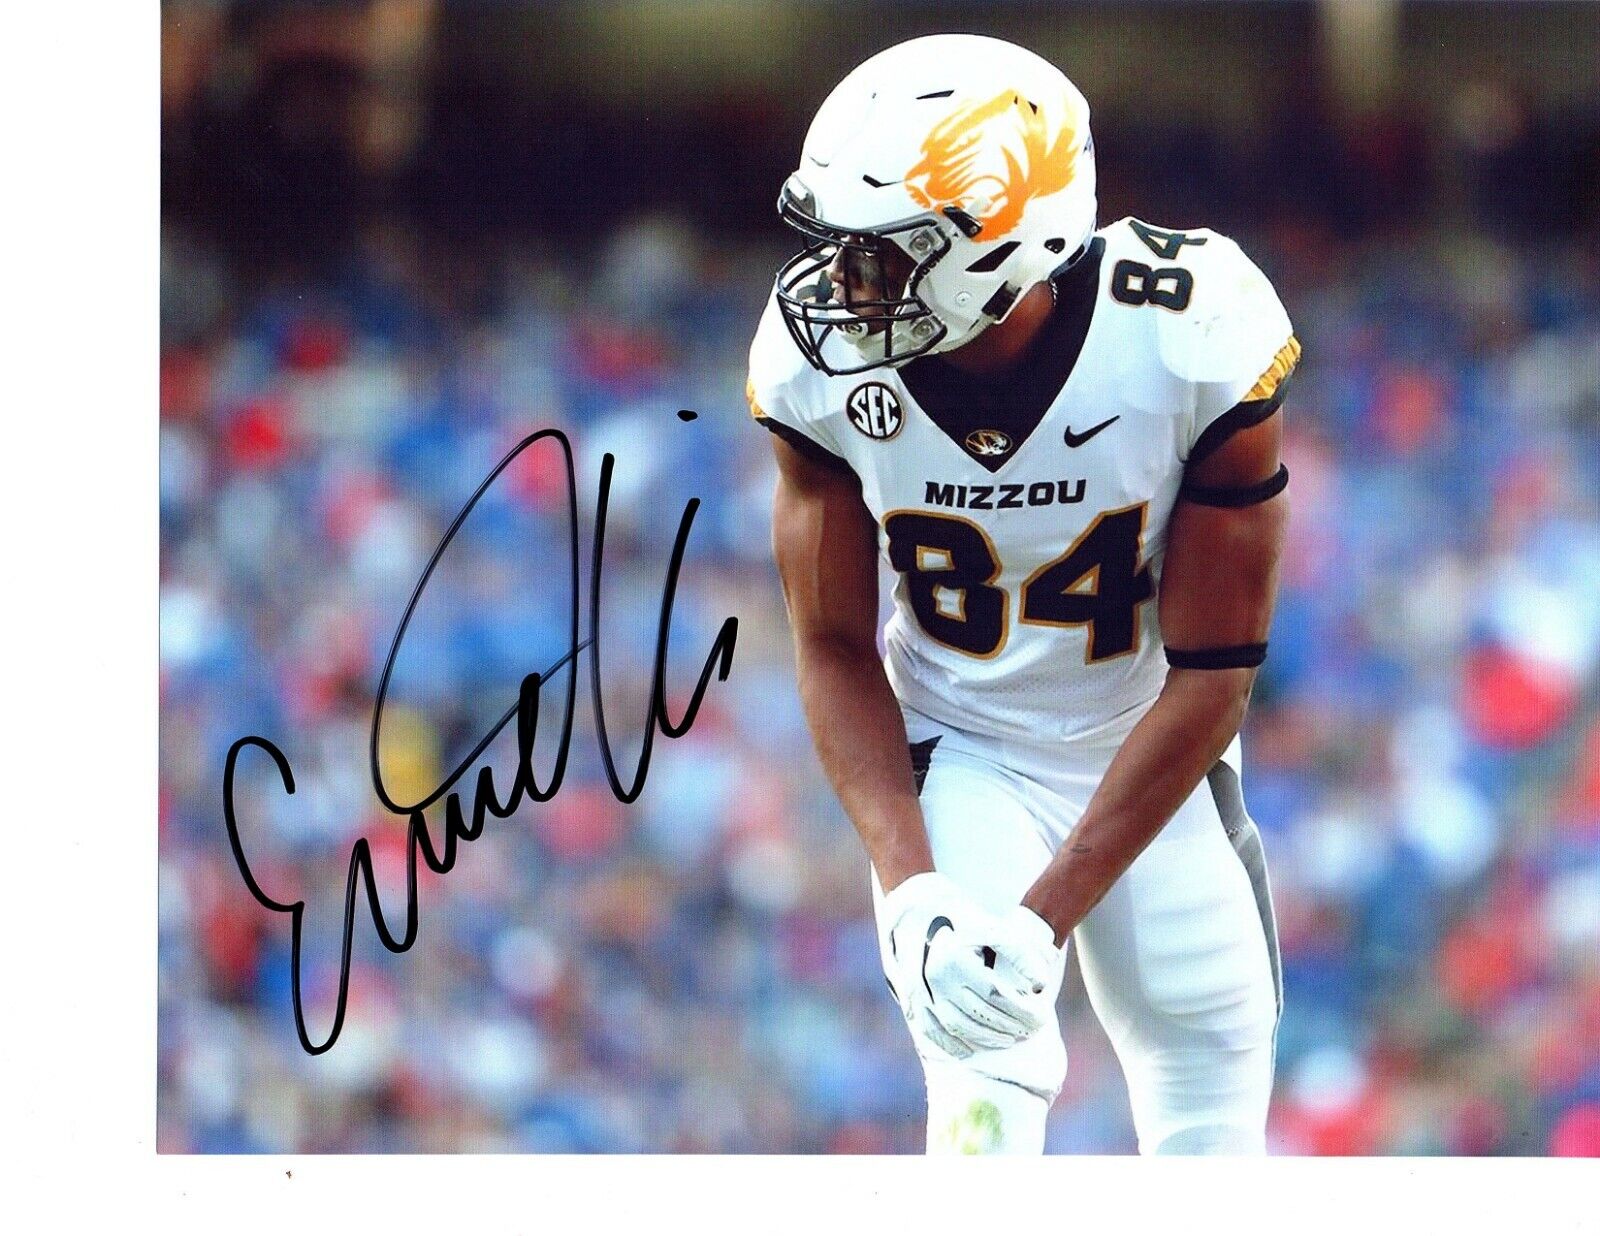 Emanuel Hall Missouri Tigers Signed autographed 8x10 football Photo Poster painting Mizzou NFL L